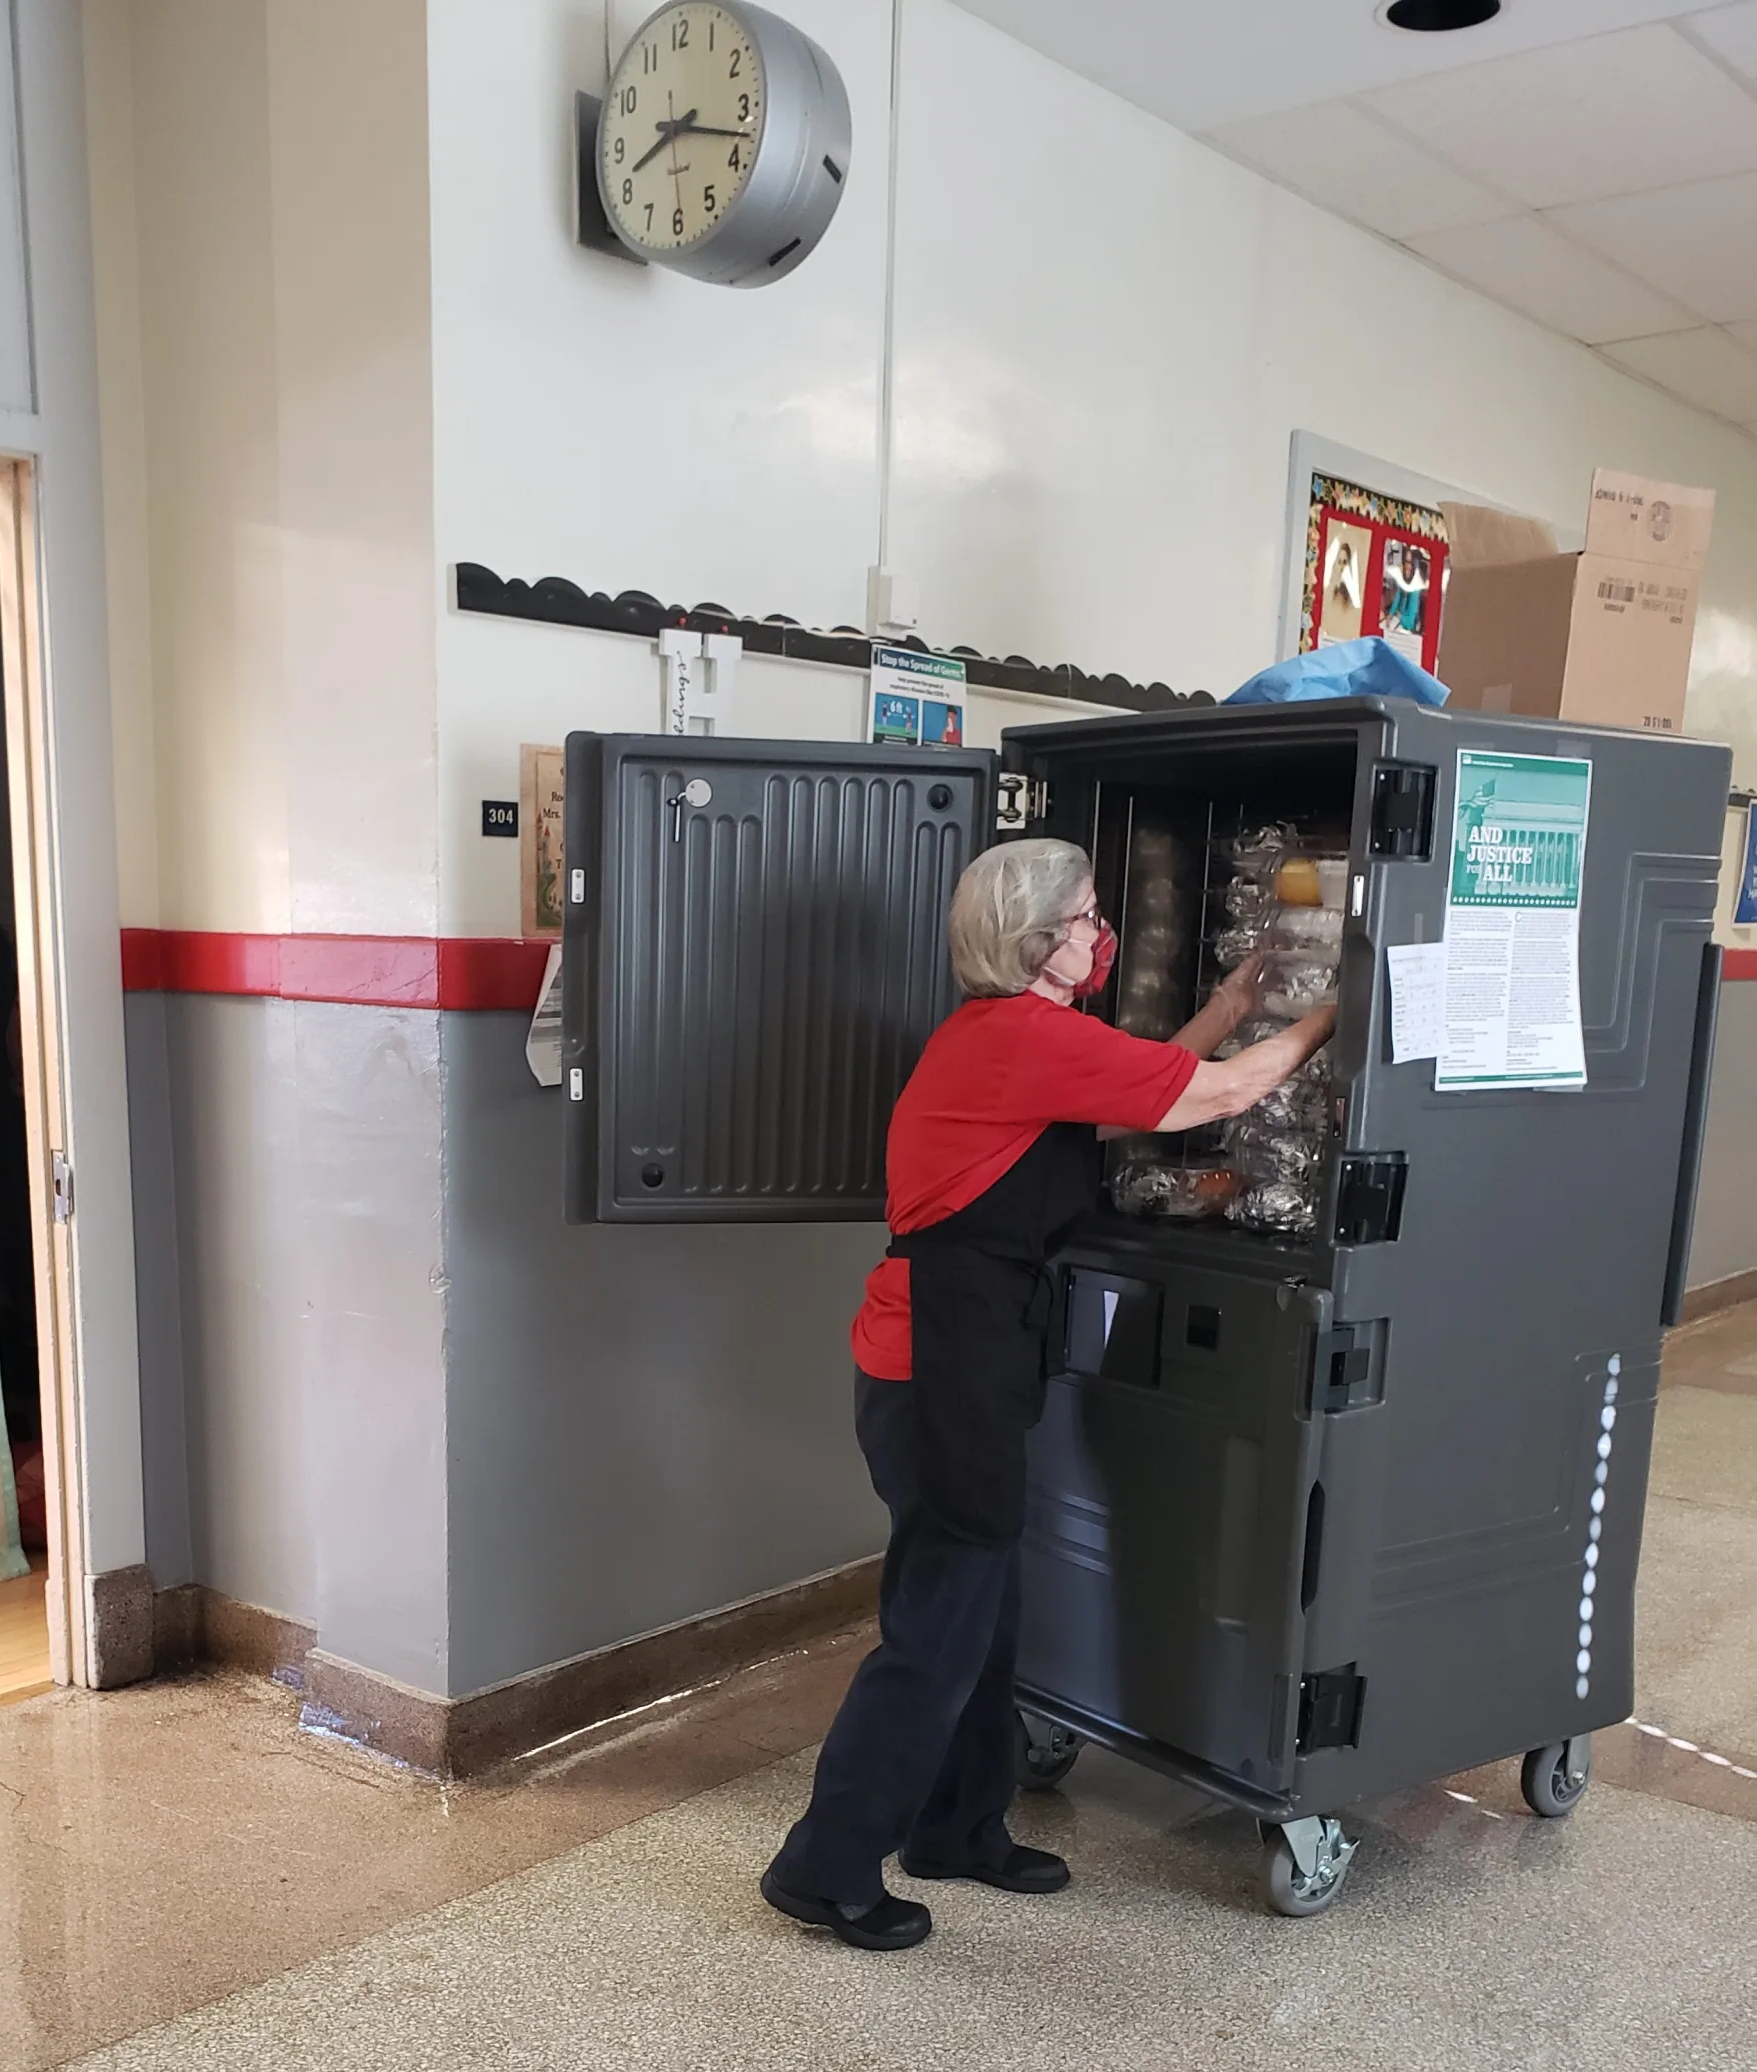 School lunch staff working with mobile cart for lunch foodservice